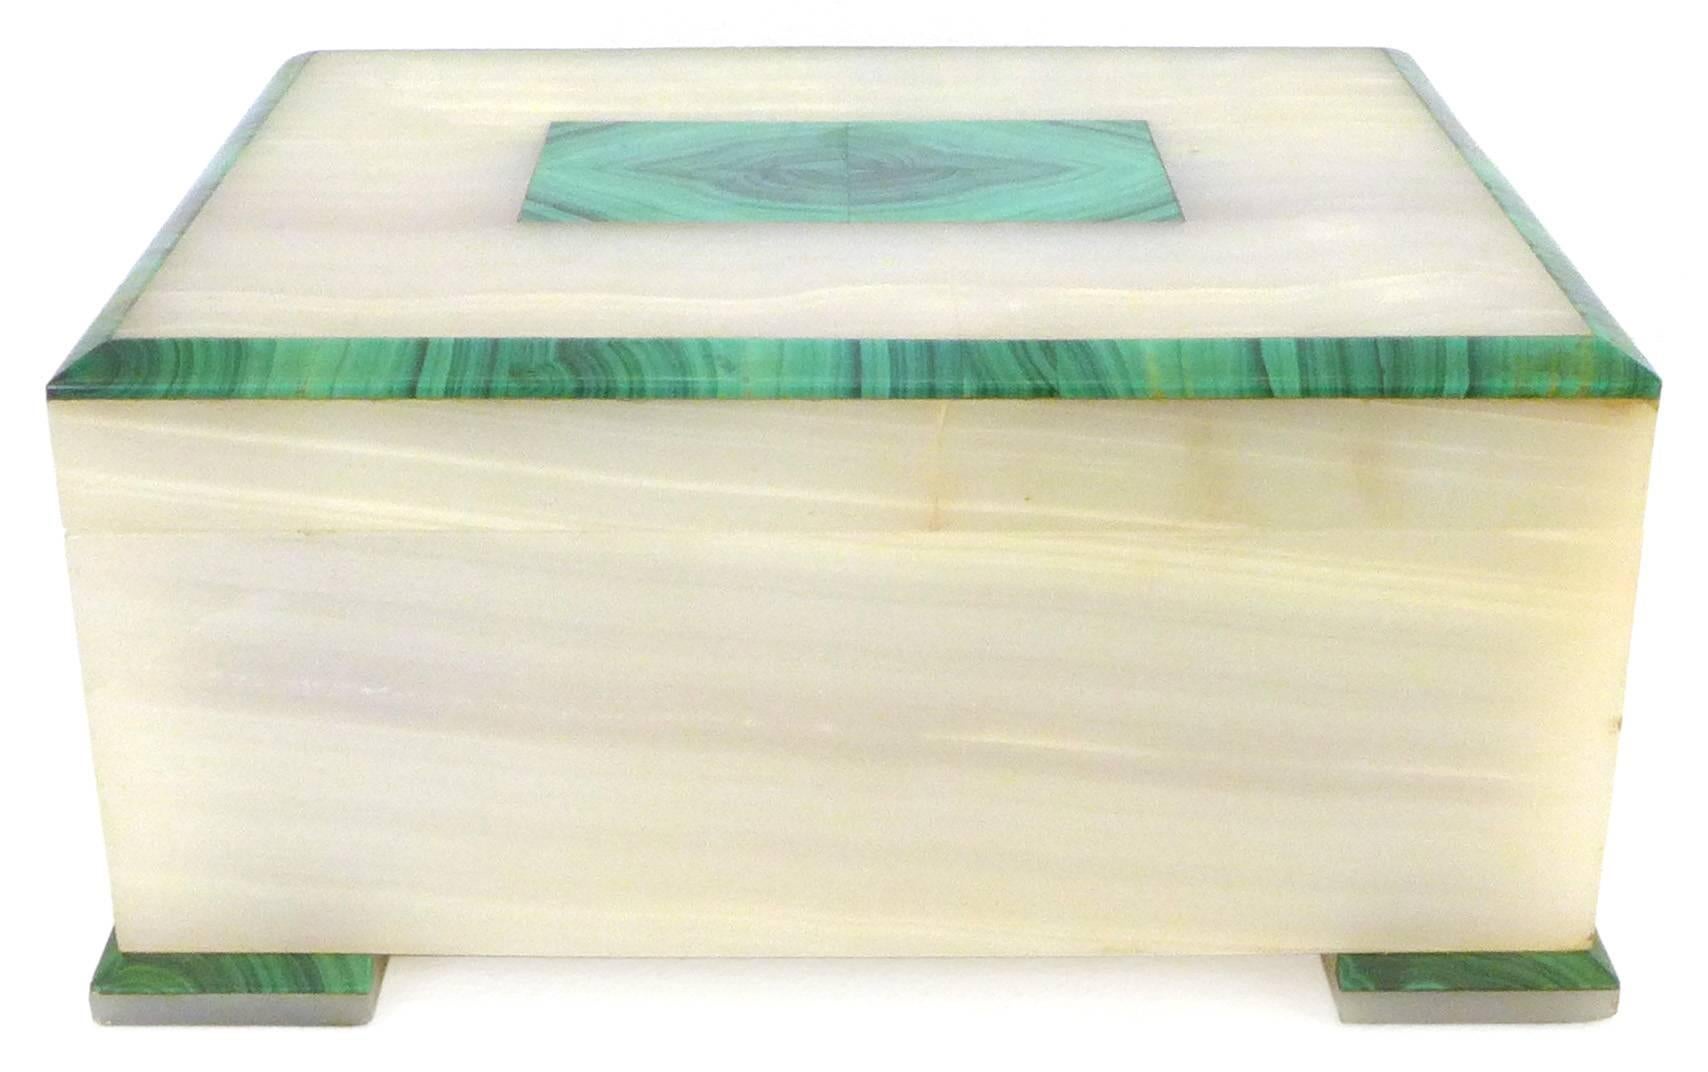 An exceptional malachite and onyx box produced by Dunhill London sometime in the 1930s. Wonderful scale, construction, mix of exotic stone and Classic Art Deco lines. A massive and chunky box likely for cigars, with a beautiful wood liner and a